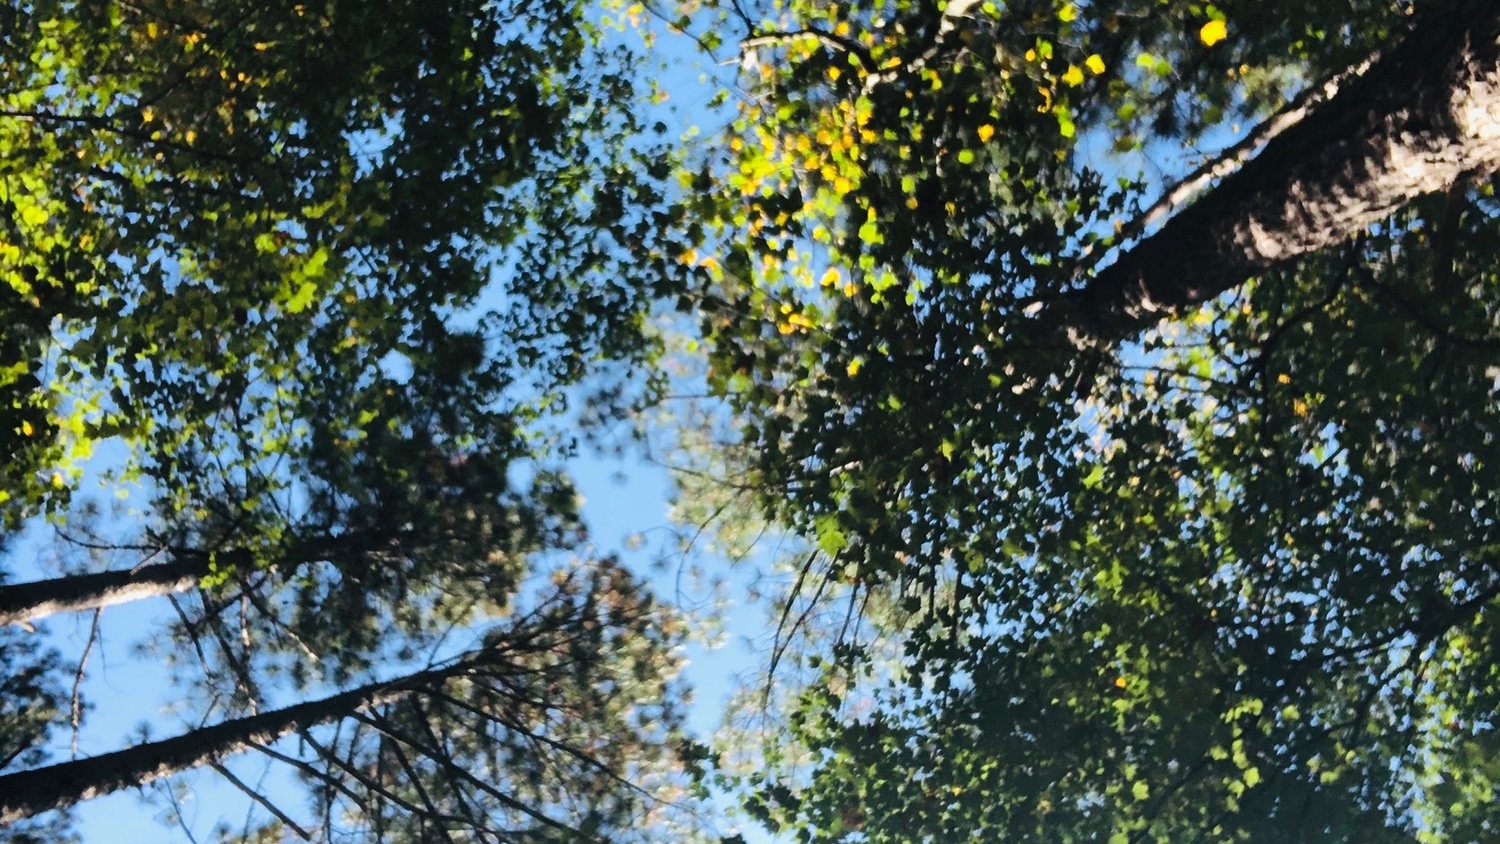 A view looking up at tall trees from below.